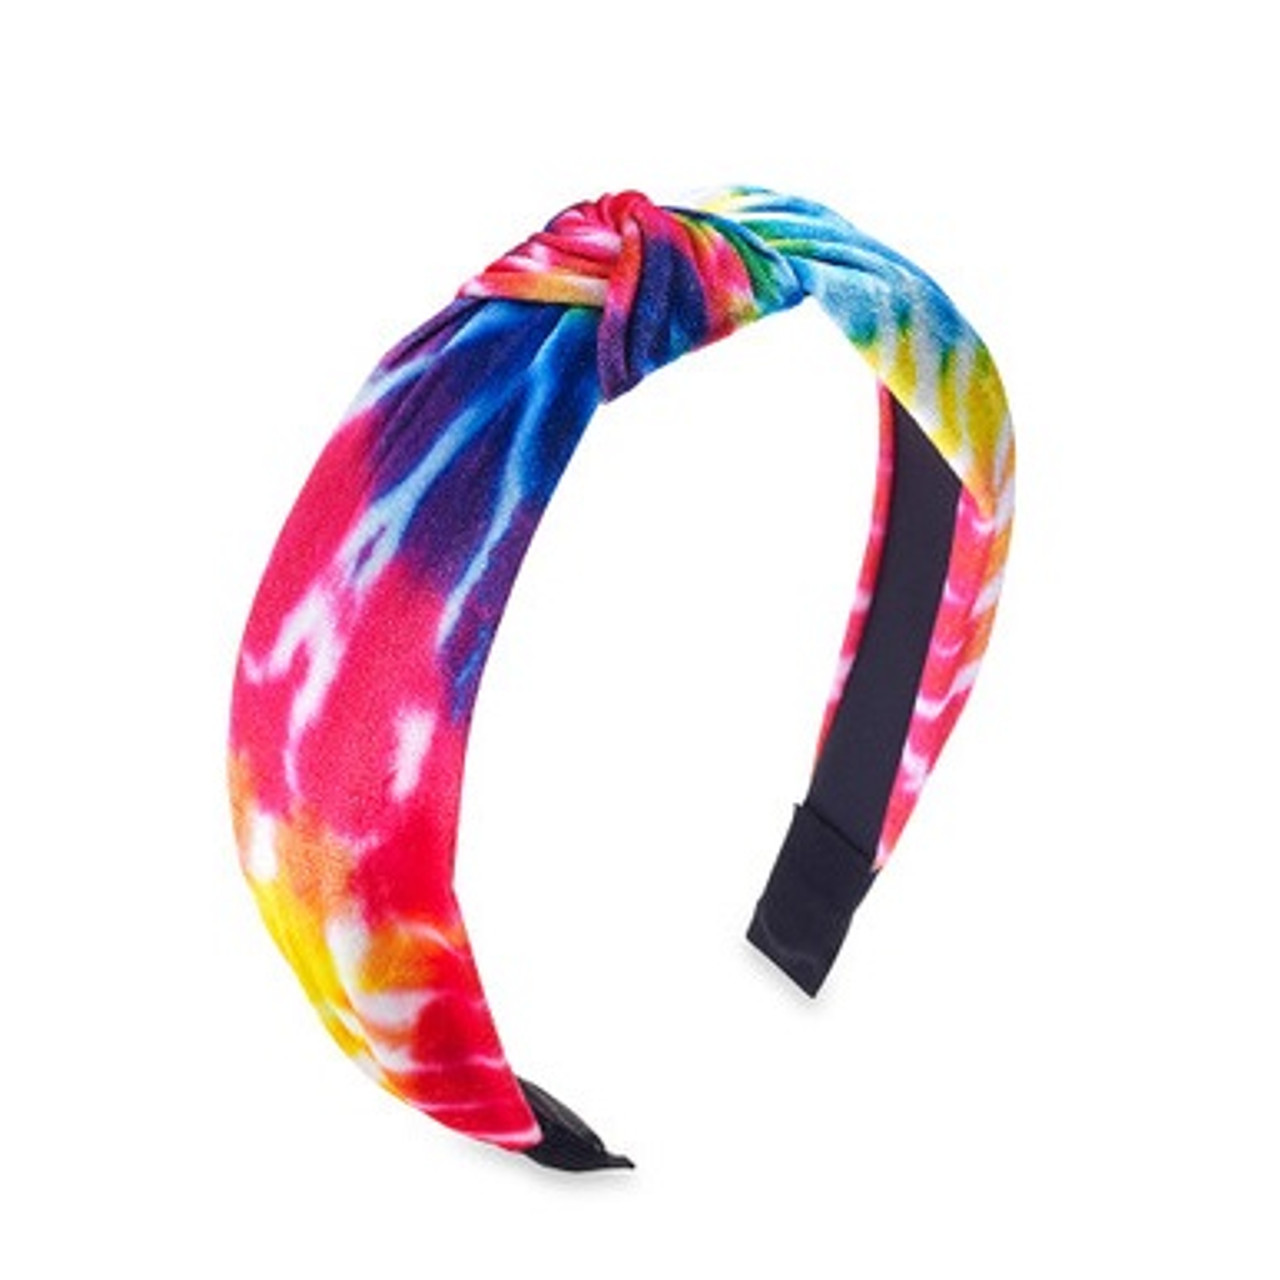 Primary Tie-Dye Knot Headbands are great for all ages!